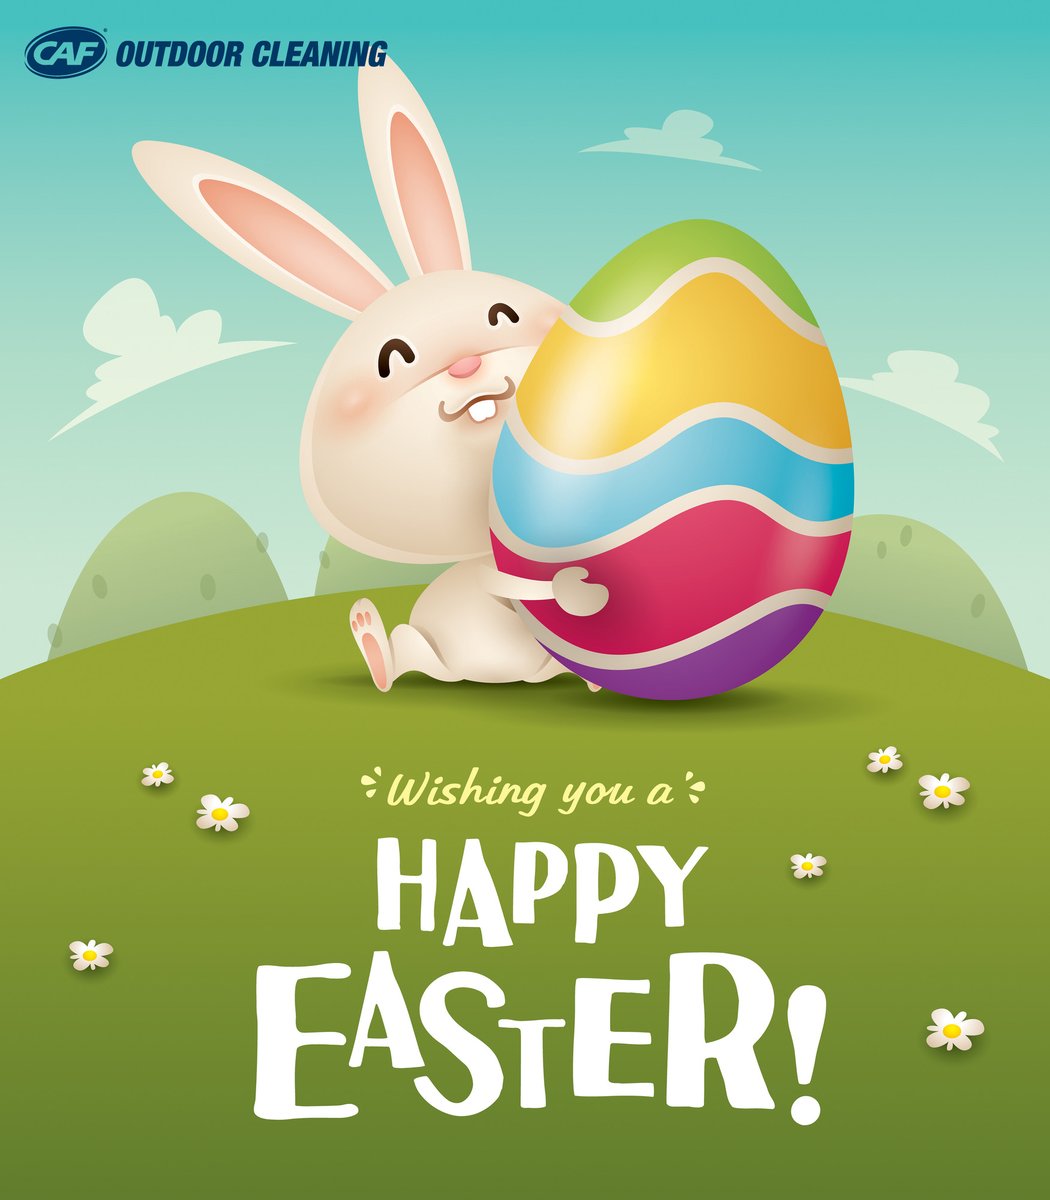 Celebrating Easter with joy and cheer! Wishing everyone a wonderful holiday. #Easter2023 #SpringRenewal from CAF Outdoor Cleaning.